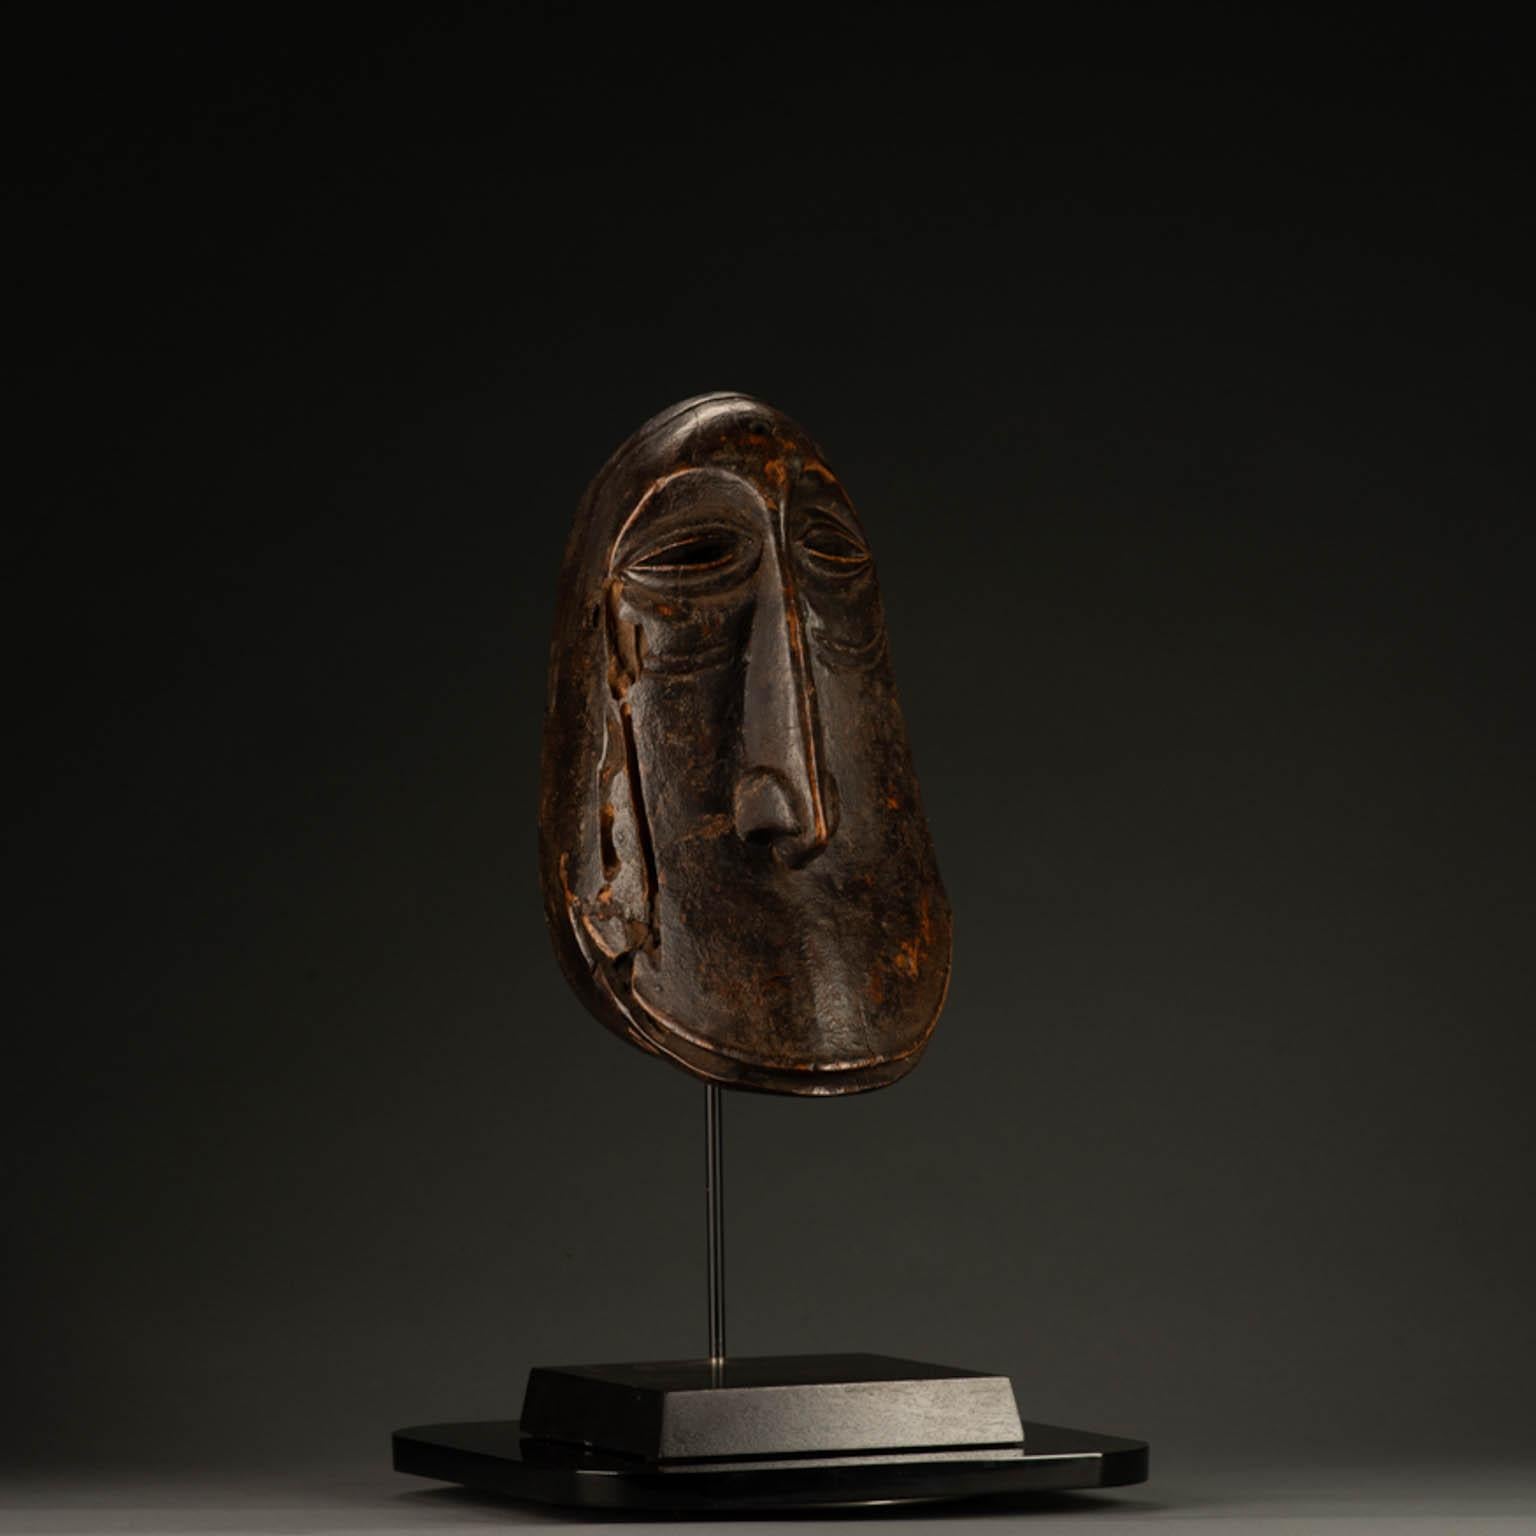  Hemba Passport Mask  

Zaire Wood Early-Mid 20th Century 13 1/2 inches

Each piece of tribal art is hand carved, passed down from generation to generation, and is an aggregation of the history and the cultural experiences of the people and places